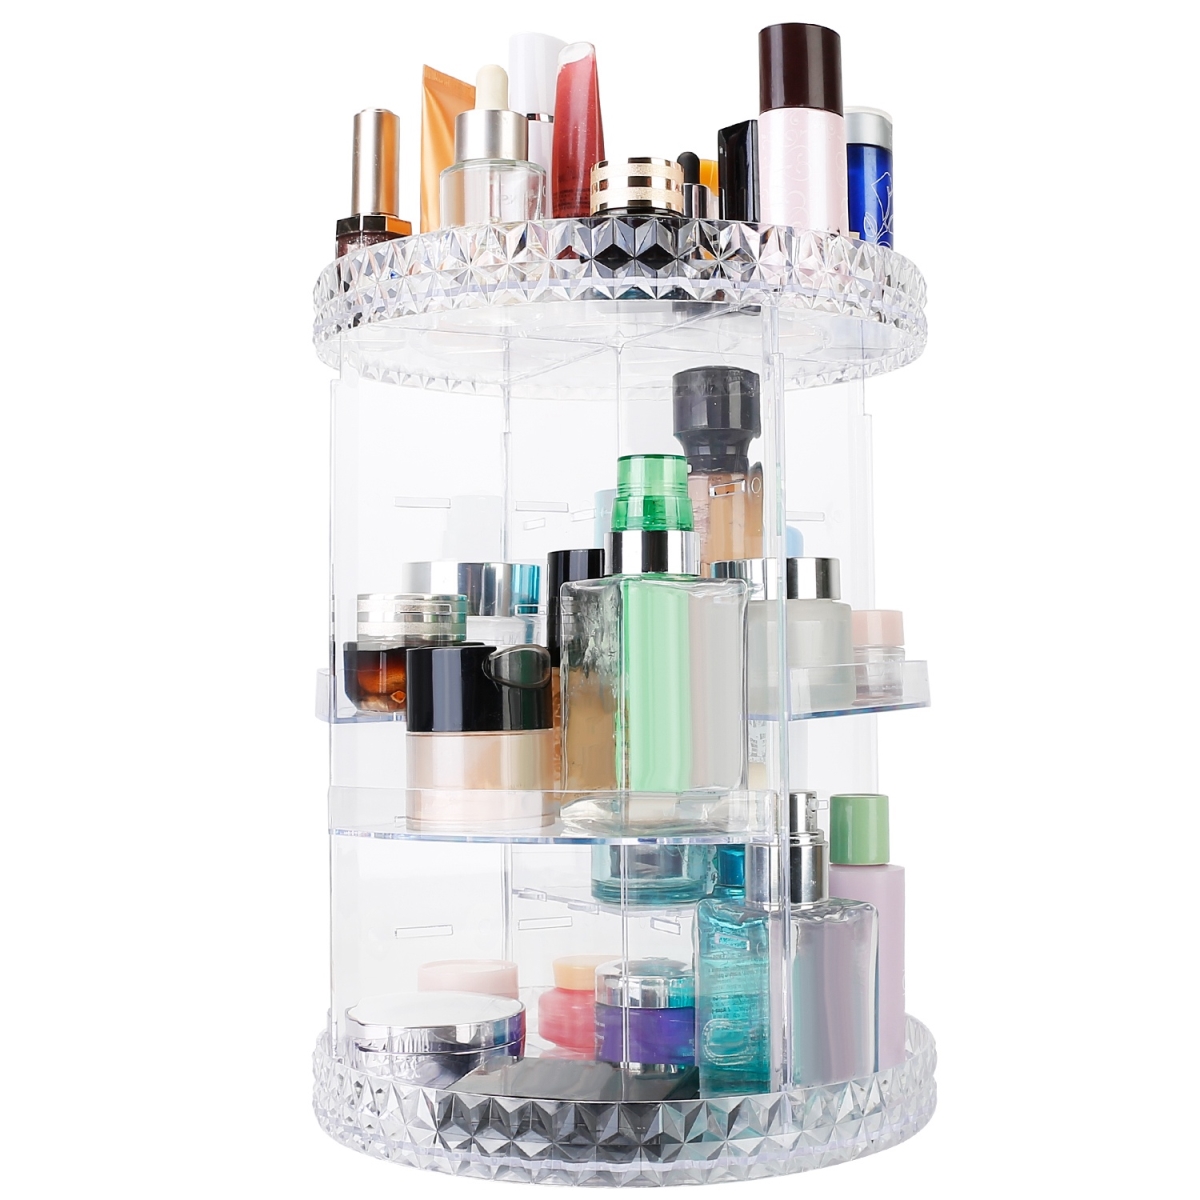 Picture of Fresh Fab Finds FFF-GPCT3219 360 Rotating Makeup Organizer Clear Cosmetic Storage Rack Transparent Jewelry Display Box Case with 4 Trays One 17-Slot Top Shelf